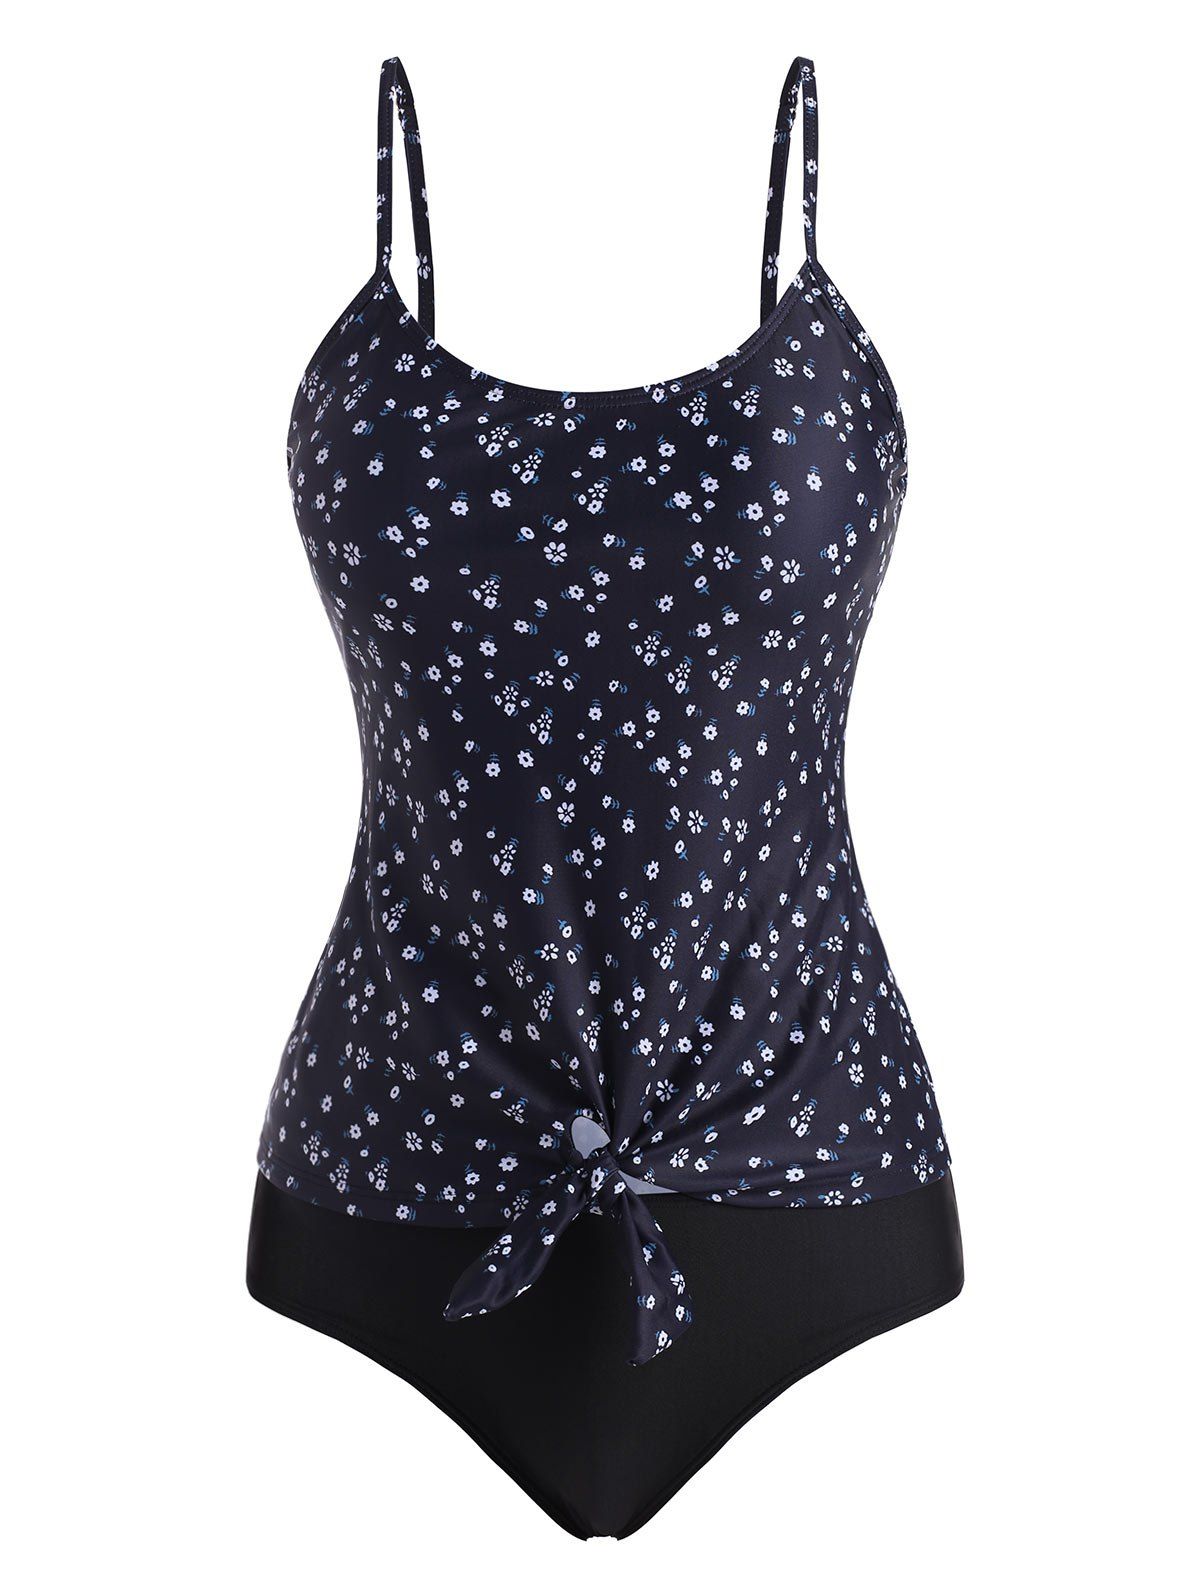 Ditsy Floral Knotted Contrast Tankini Swimwear - BLACK L